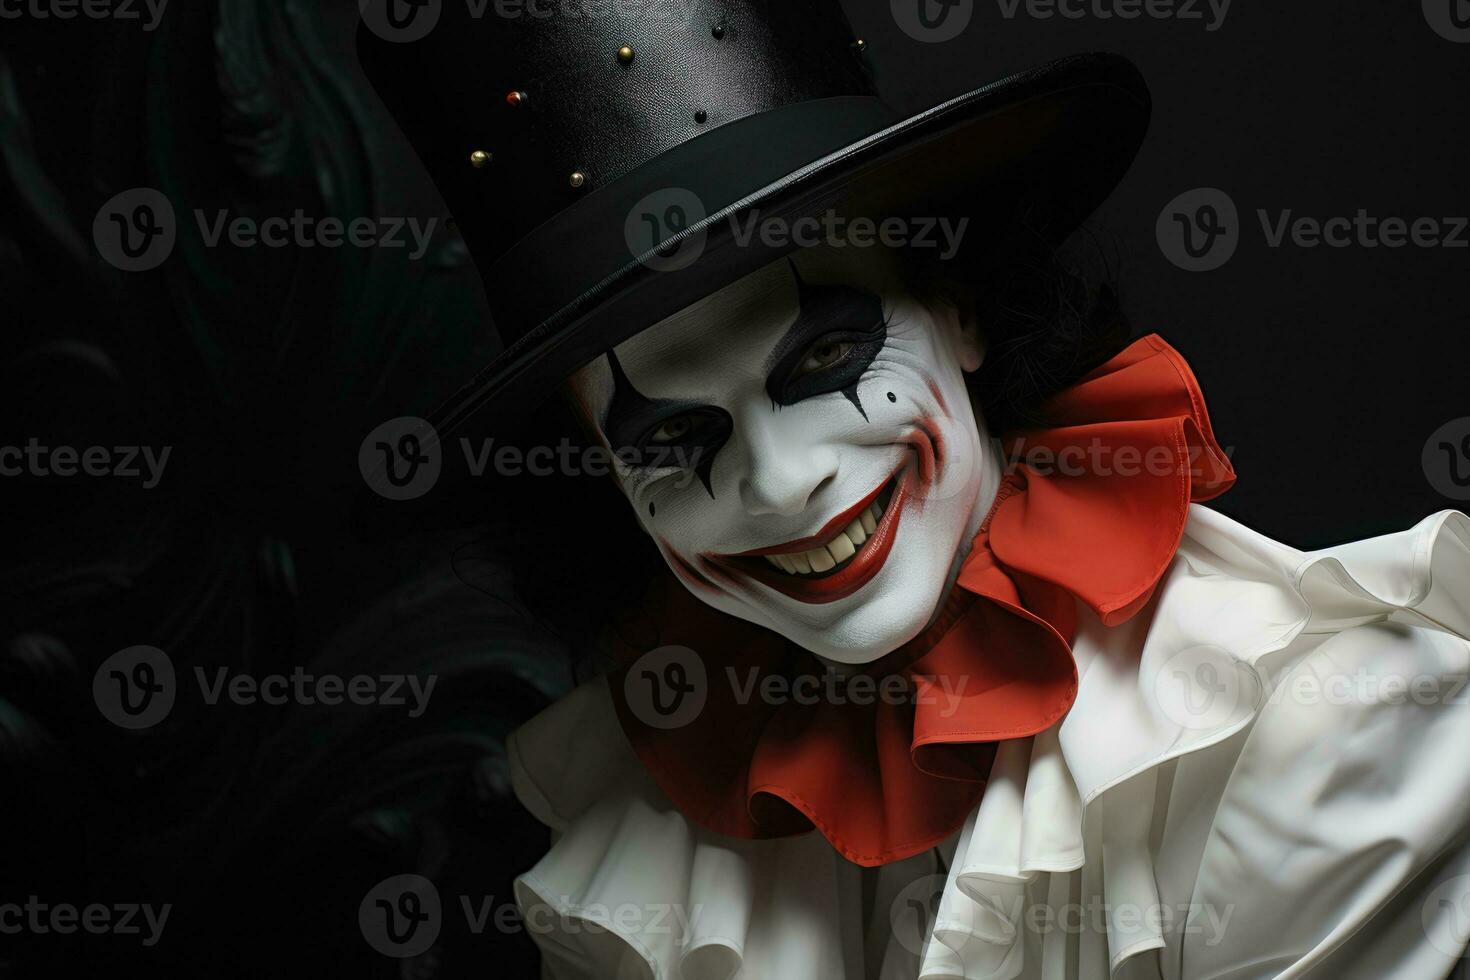 Classic clown portraiture rich in jovial red mysterious black and pristine white photo